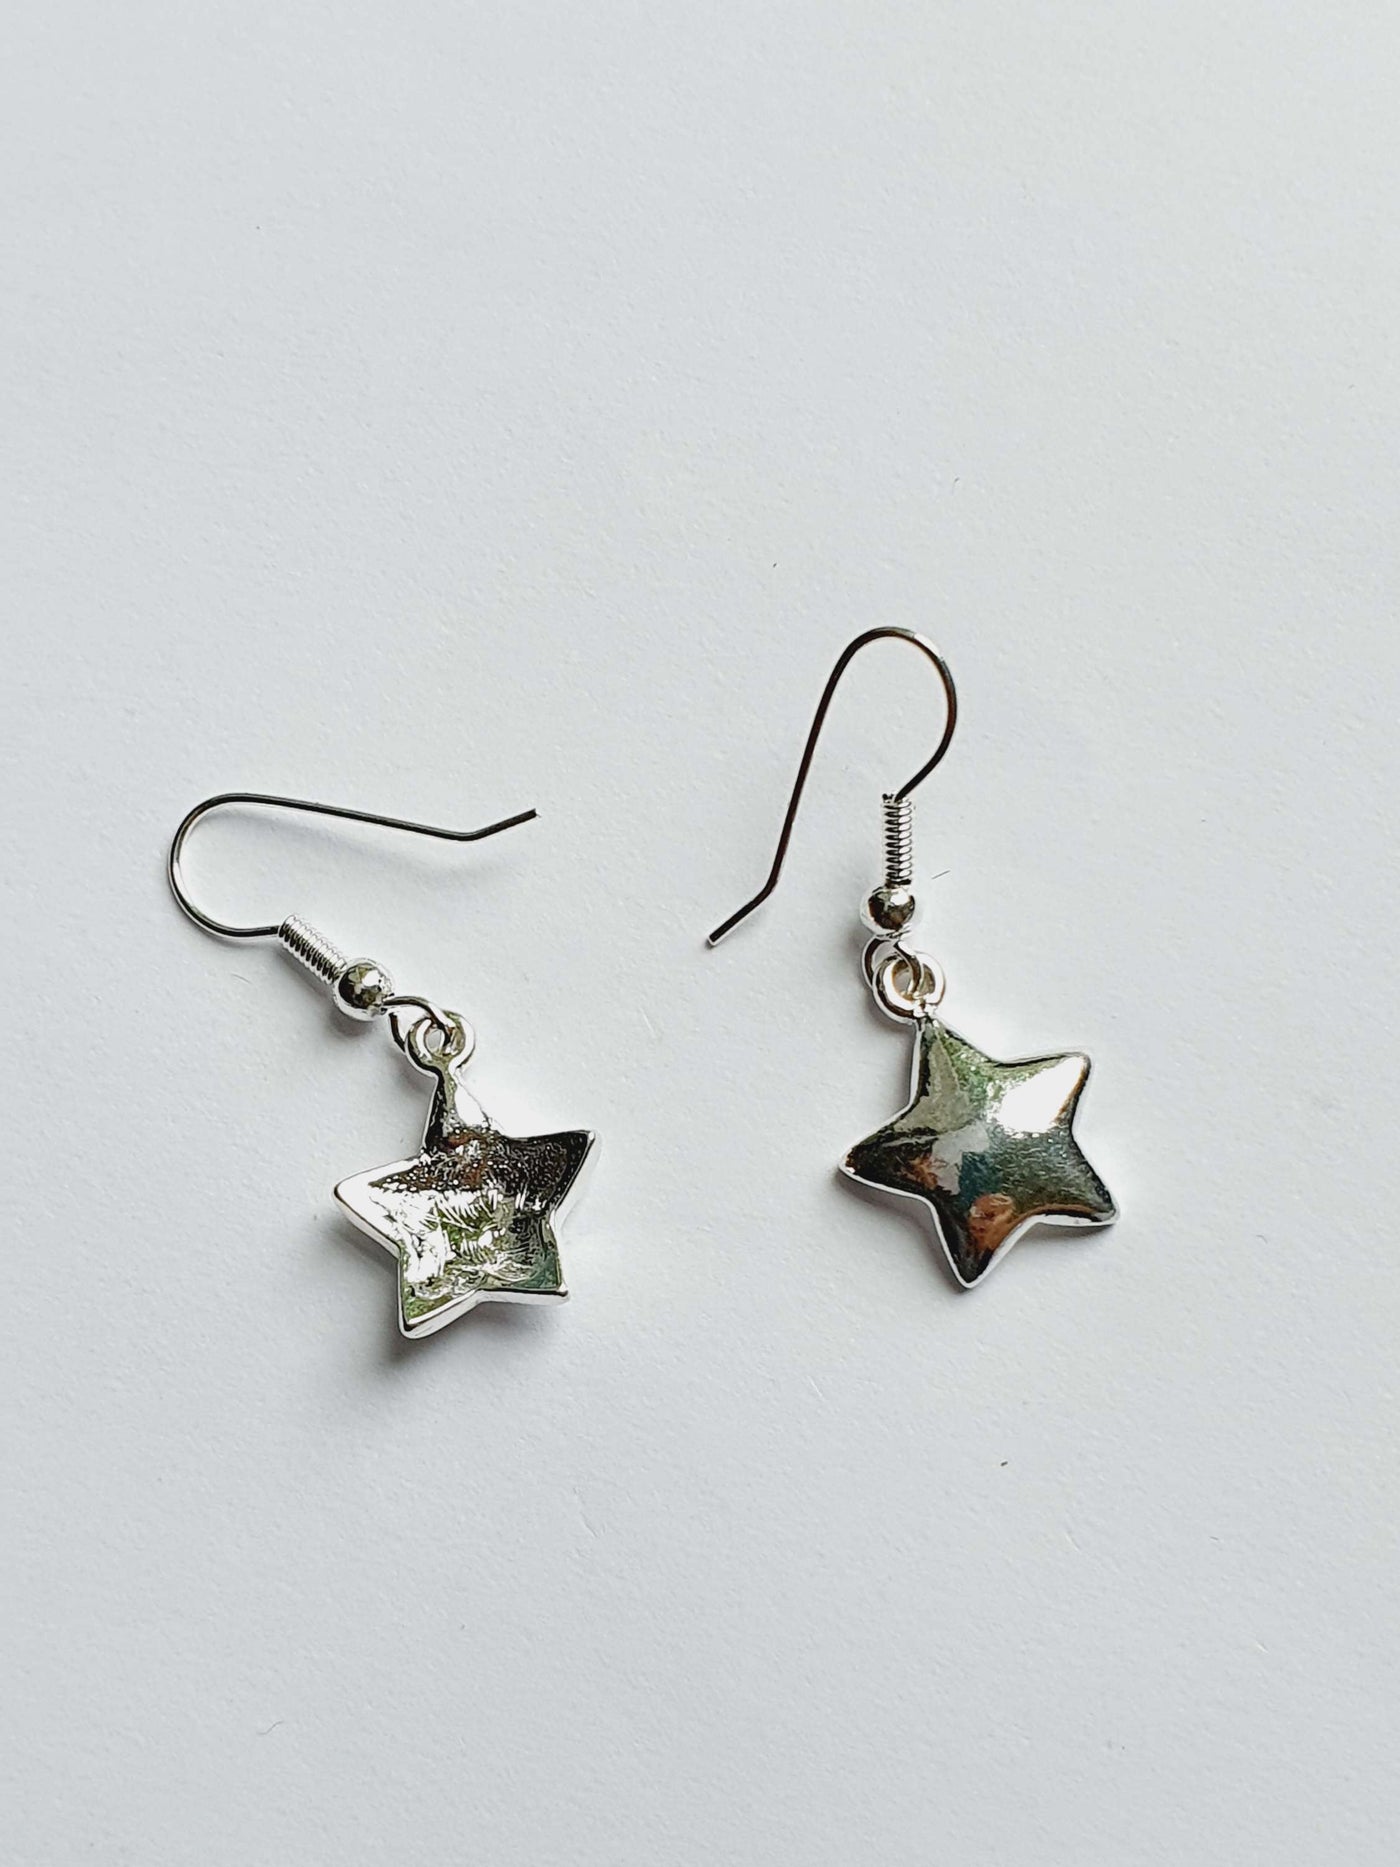 Vintage Silver Plated Drop Earrings with Star Charm